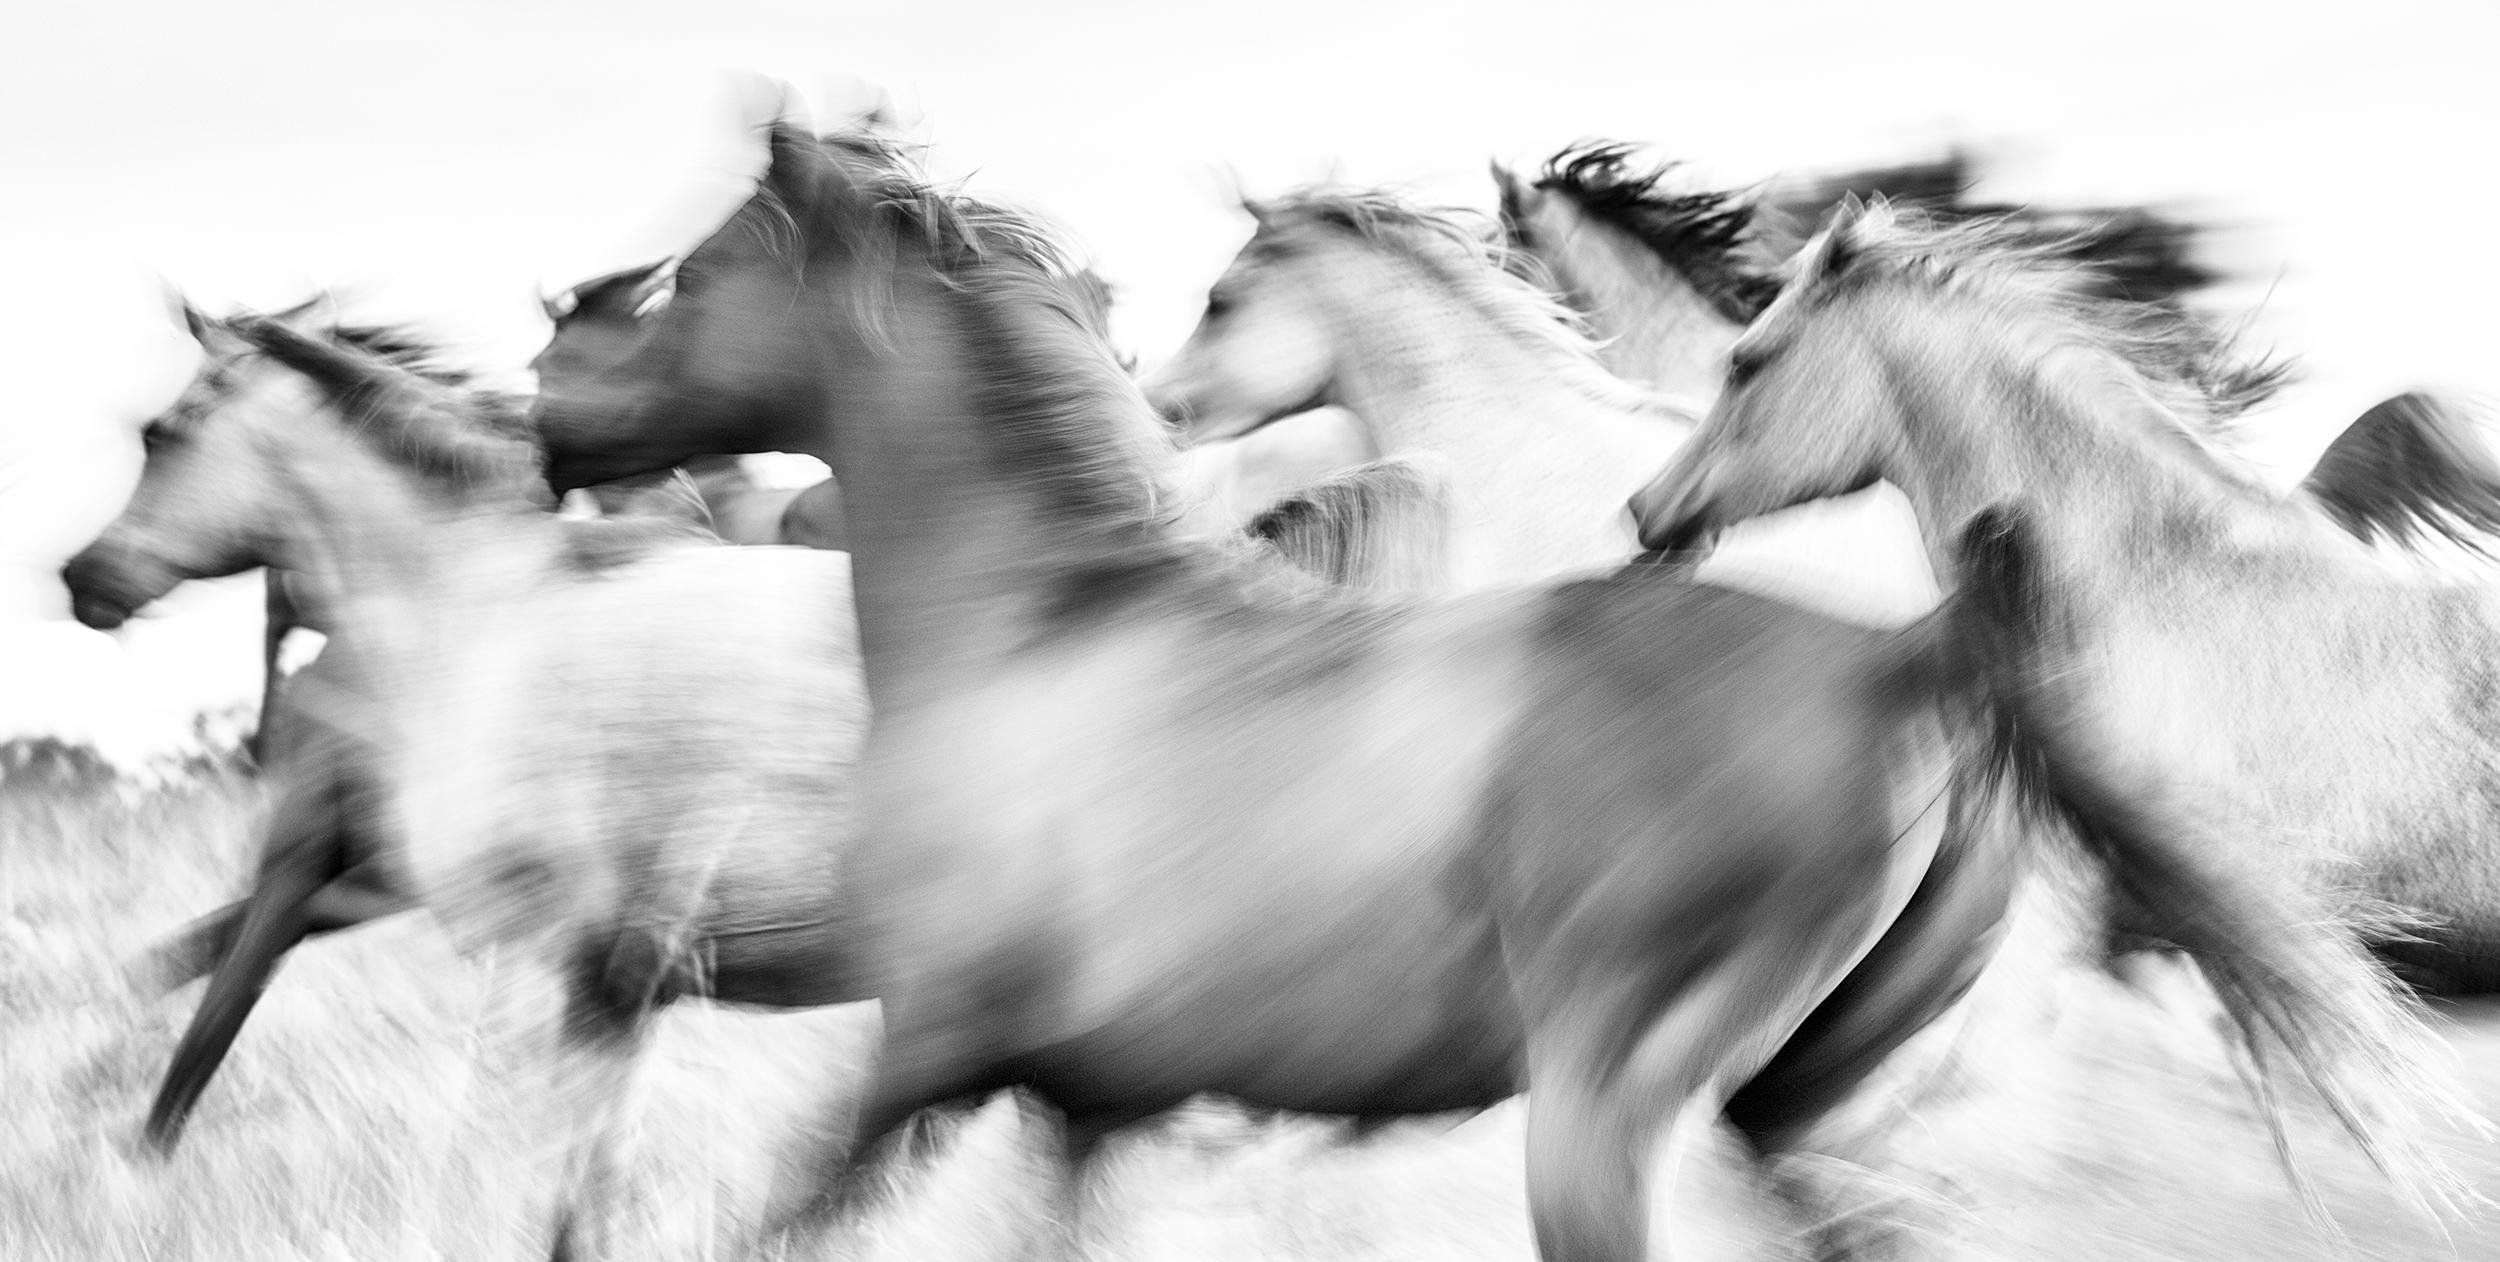 Archival Pigment Print Under Acrylic Glass
Edition of 15

"Horses stir passion, inspire respect, and have influenced human history, unlike any other animal. These unique creatures represent strength, pride, and beauty. Raphael Macek explores all of